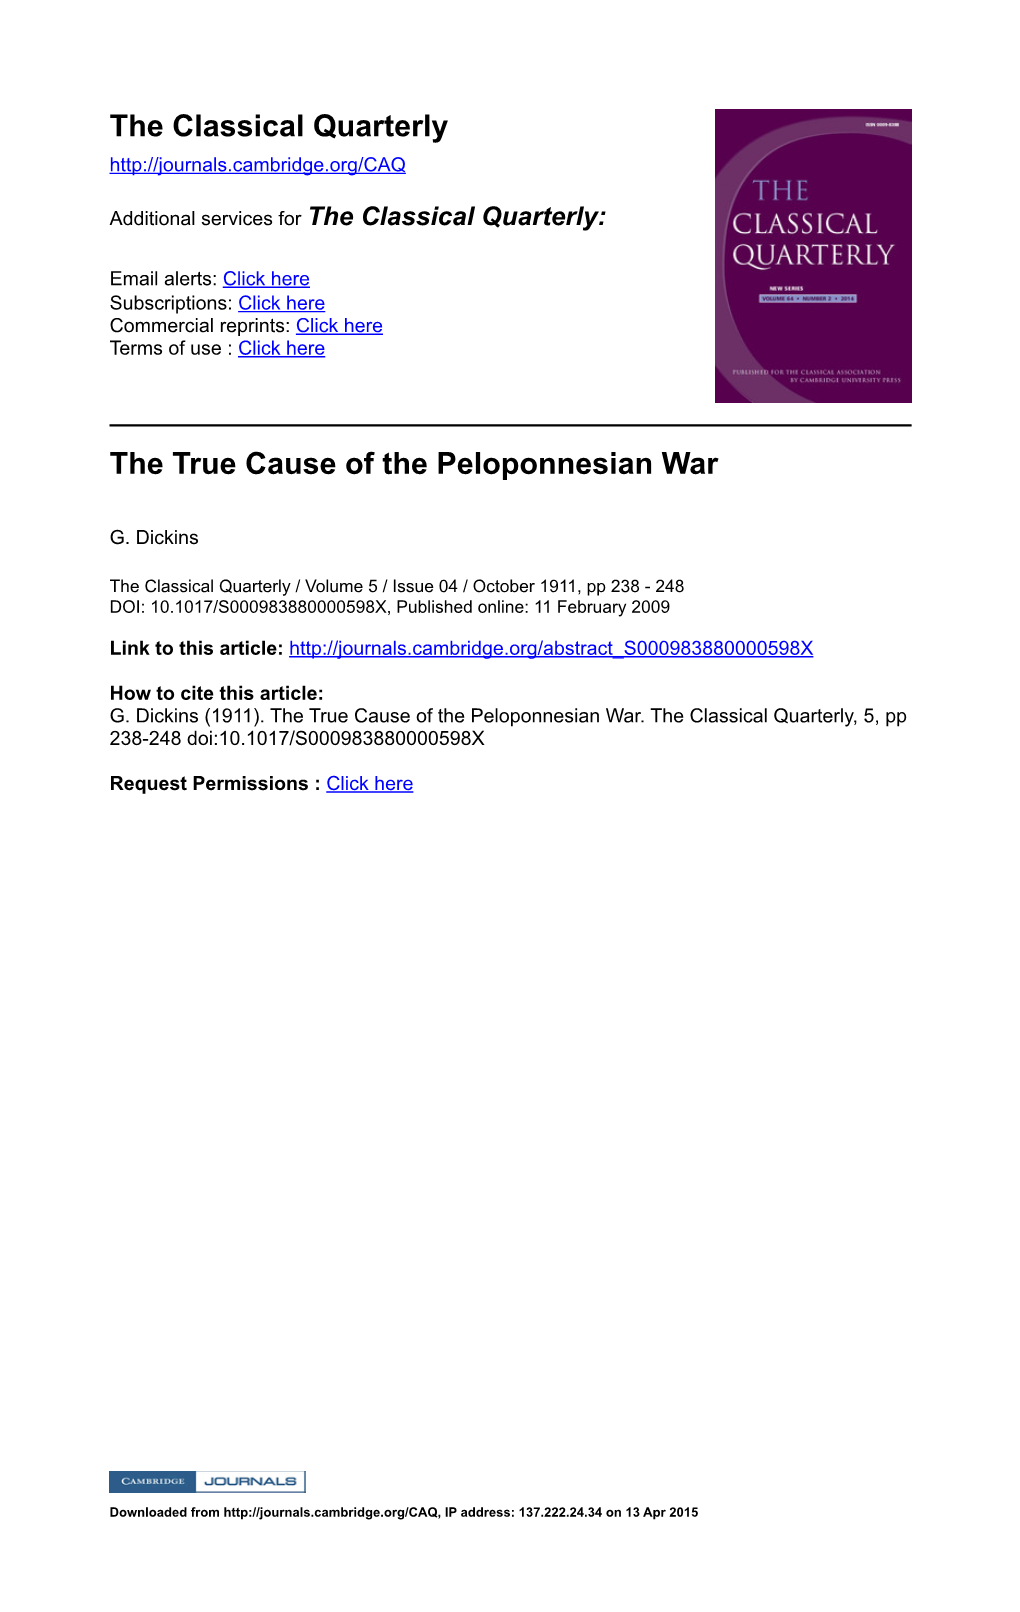 The True Cause of the Peloponnesian War